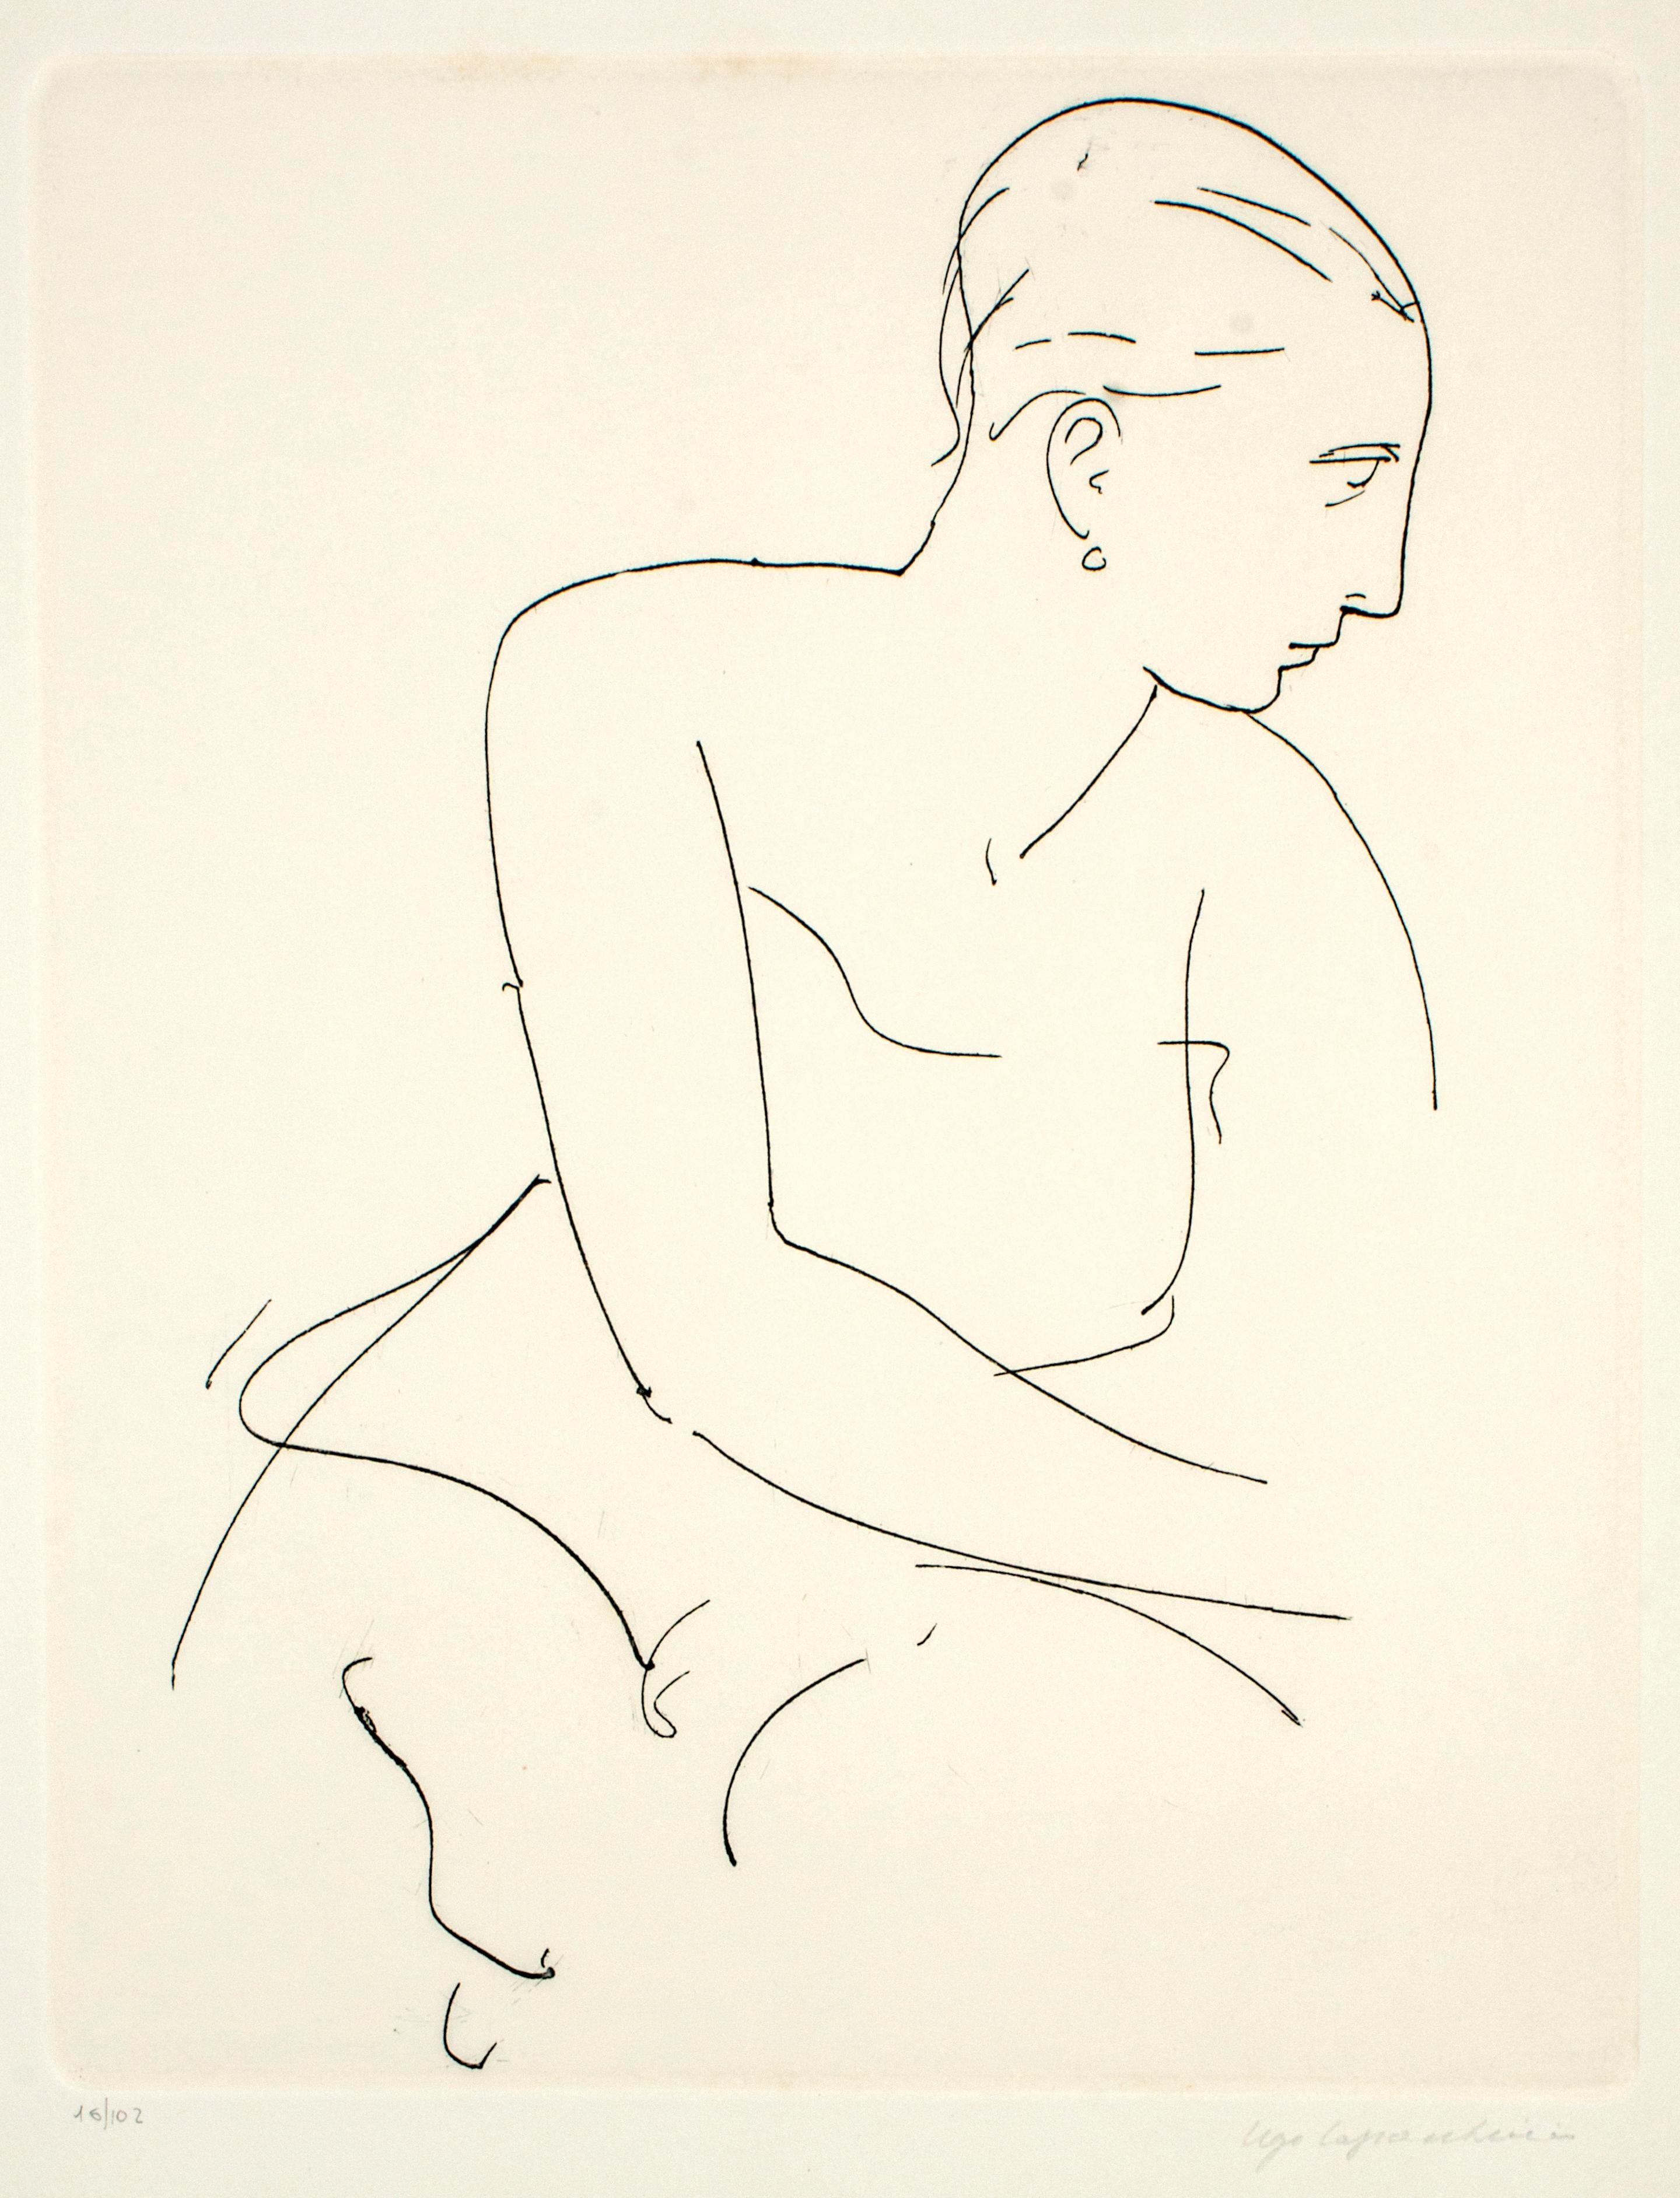 Ugo Capocchini Nude Print - Profile of Woman - Etching and Drypoint by U. Capocchini - 1964